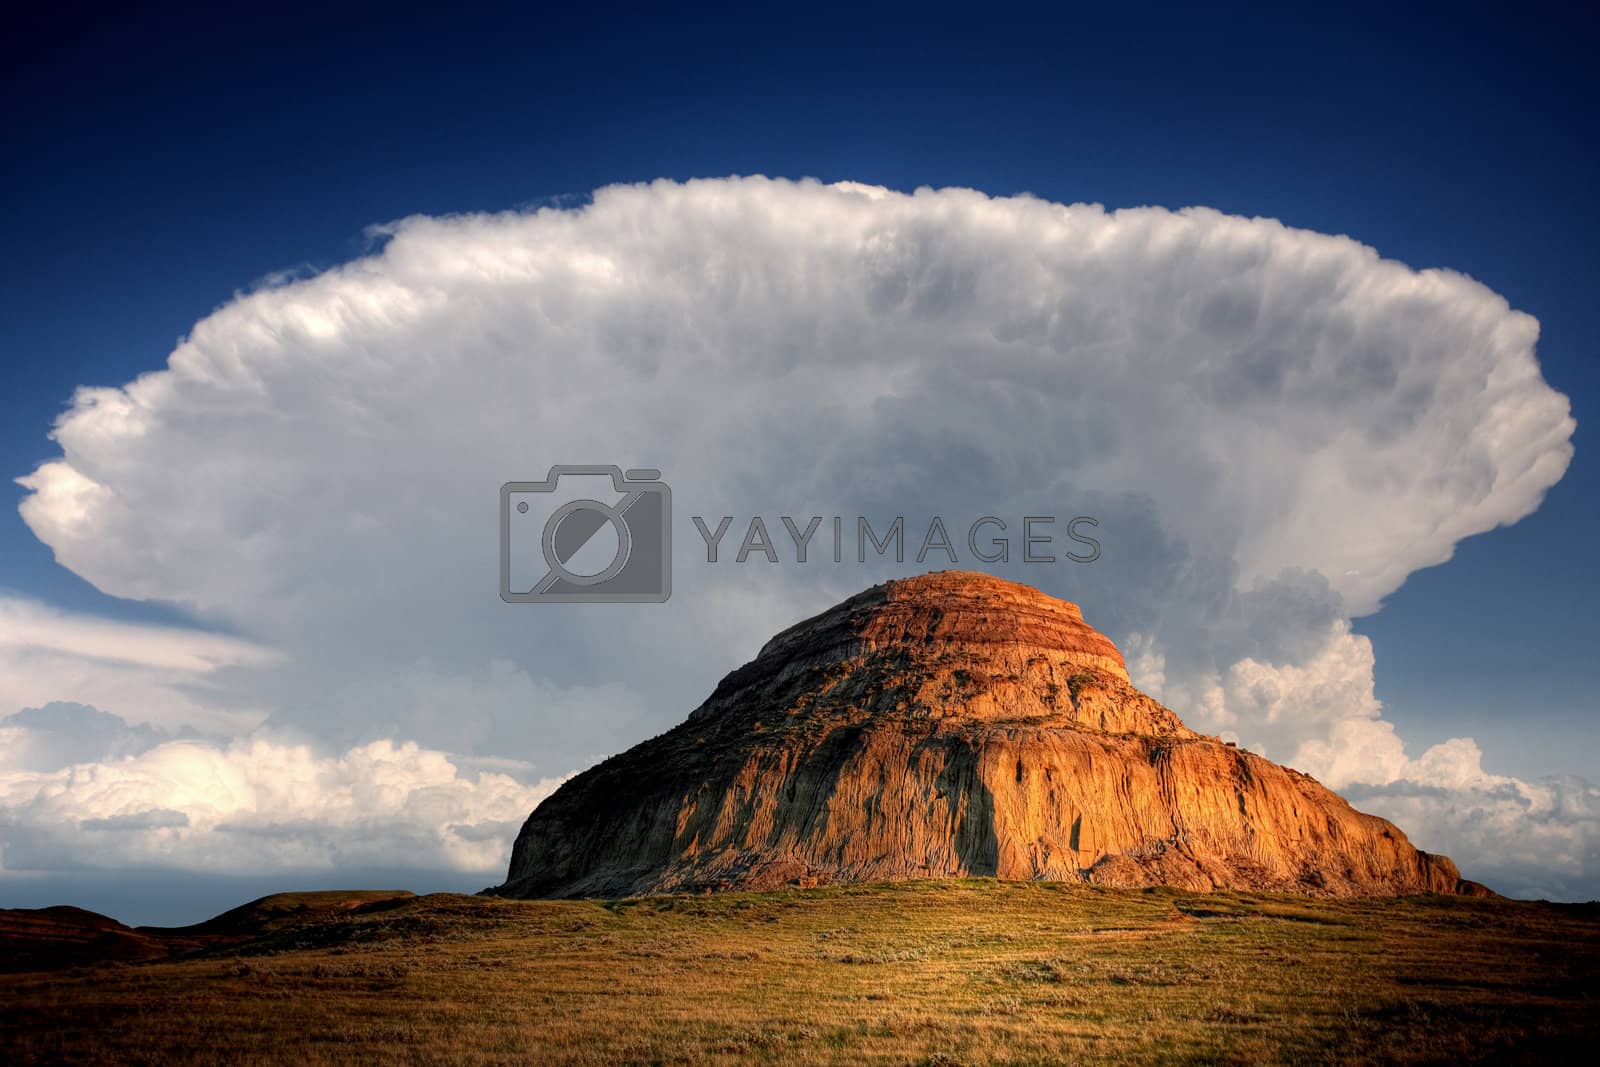 Royalty free image of Castle Butte in Big Muddy Valley of Saskatchewan by pictureguy